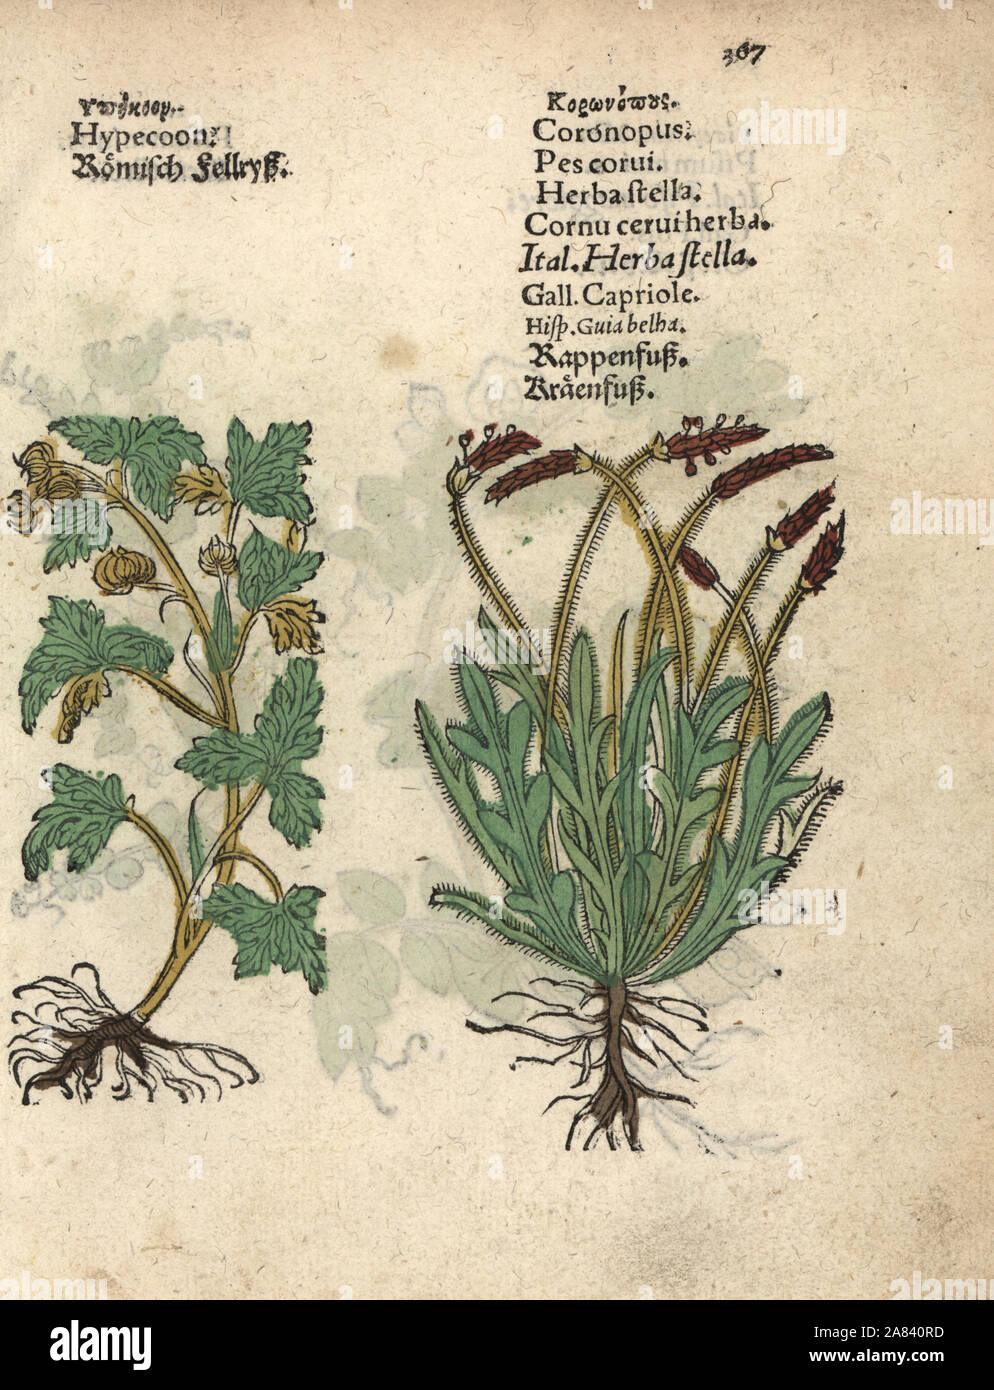 Hypecoum procumbens and swineweed, Coronopus squamatus. Handcoloured woodblock engraving of a botanical illustration from Adam Lonicer's Krauterbuch, or Herbal, Frankfurt, 1557. This from a 17th century pirate edition or atlas of illustrations only, with captions in Latin, Greek, French, Italian, German, and in English manuscript. Stock Photo